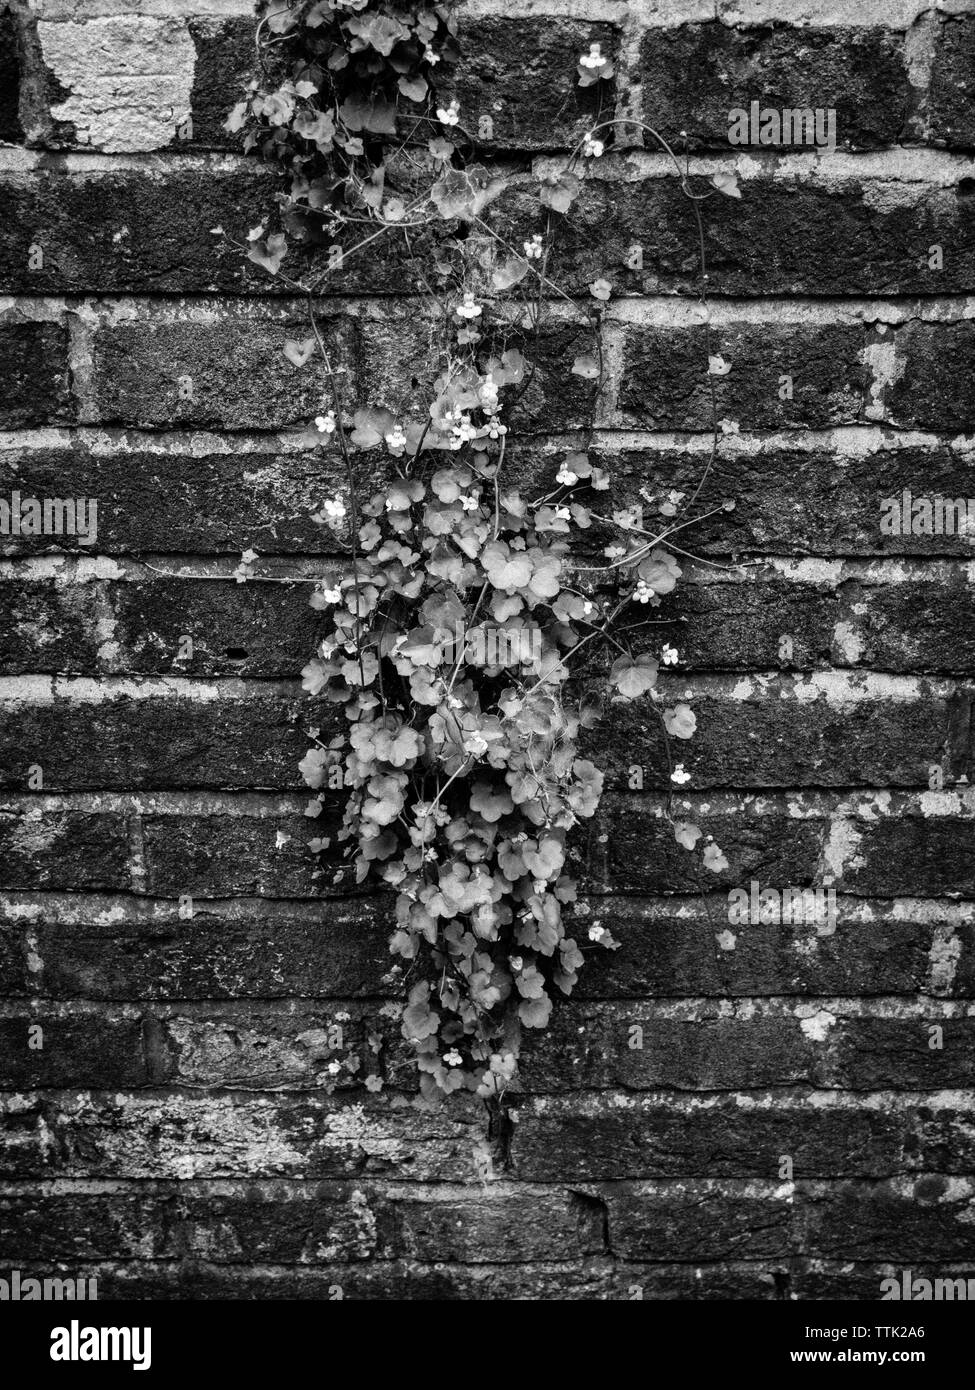 Black and White Still Life, Flowers on Brick Wall, on the Ridgeway Trail, Goring-on-Thames, Oxfordshire, England, UK, GB. Stock Photo